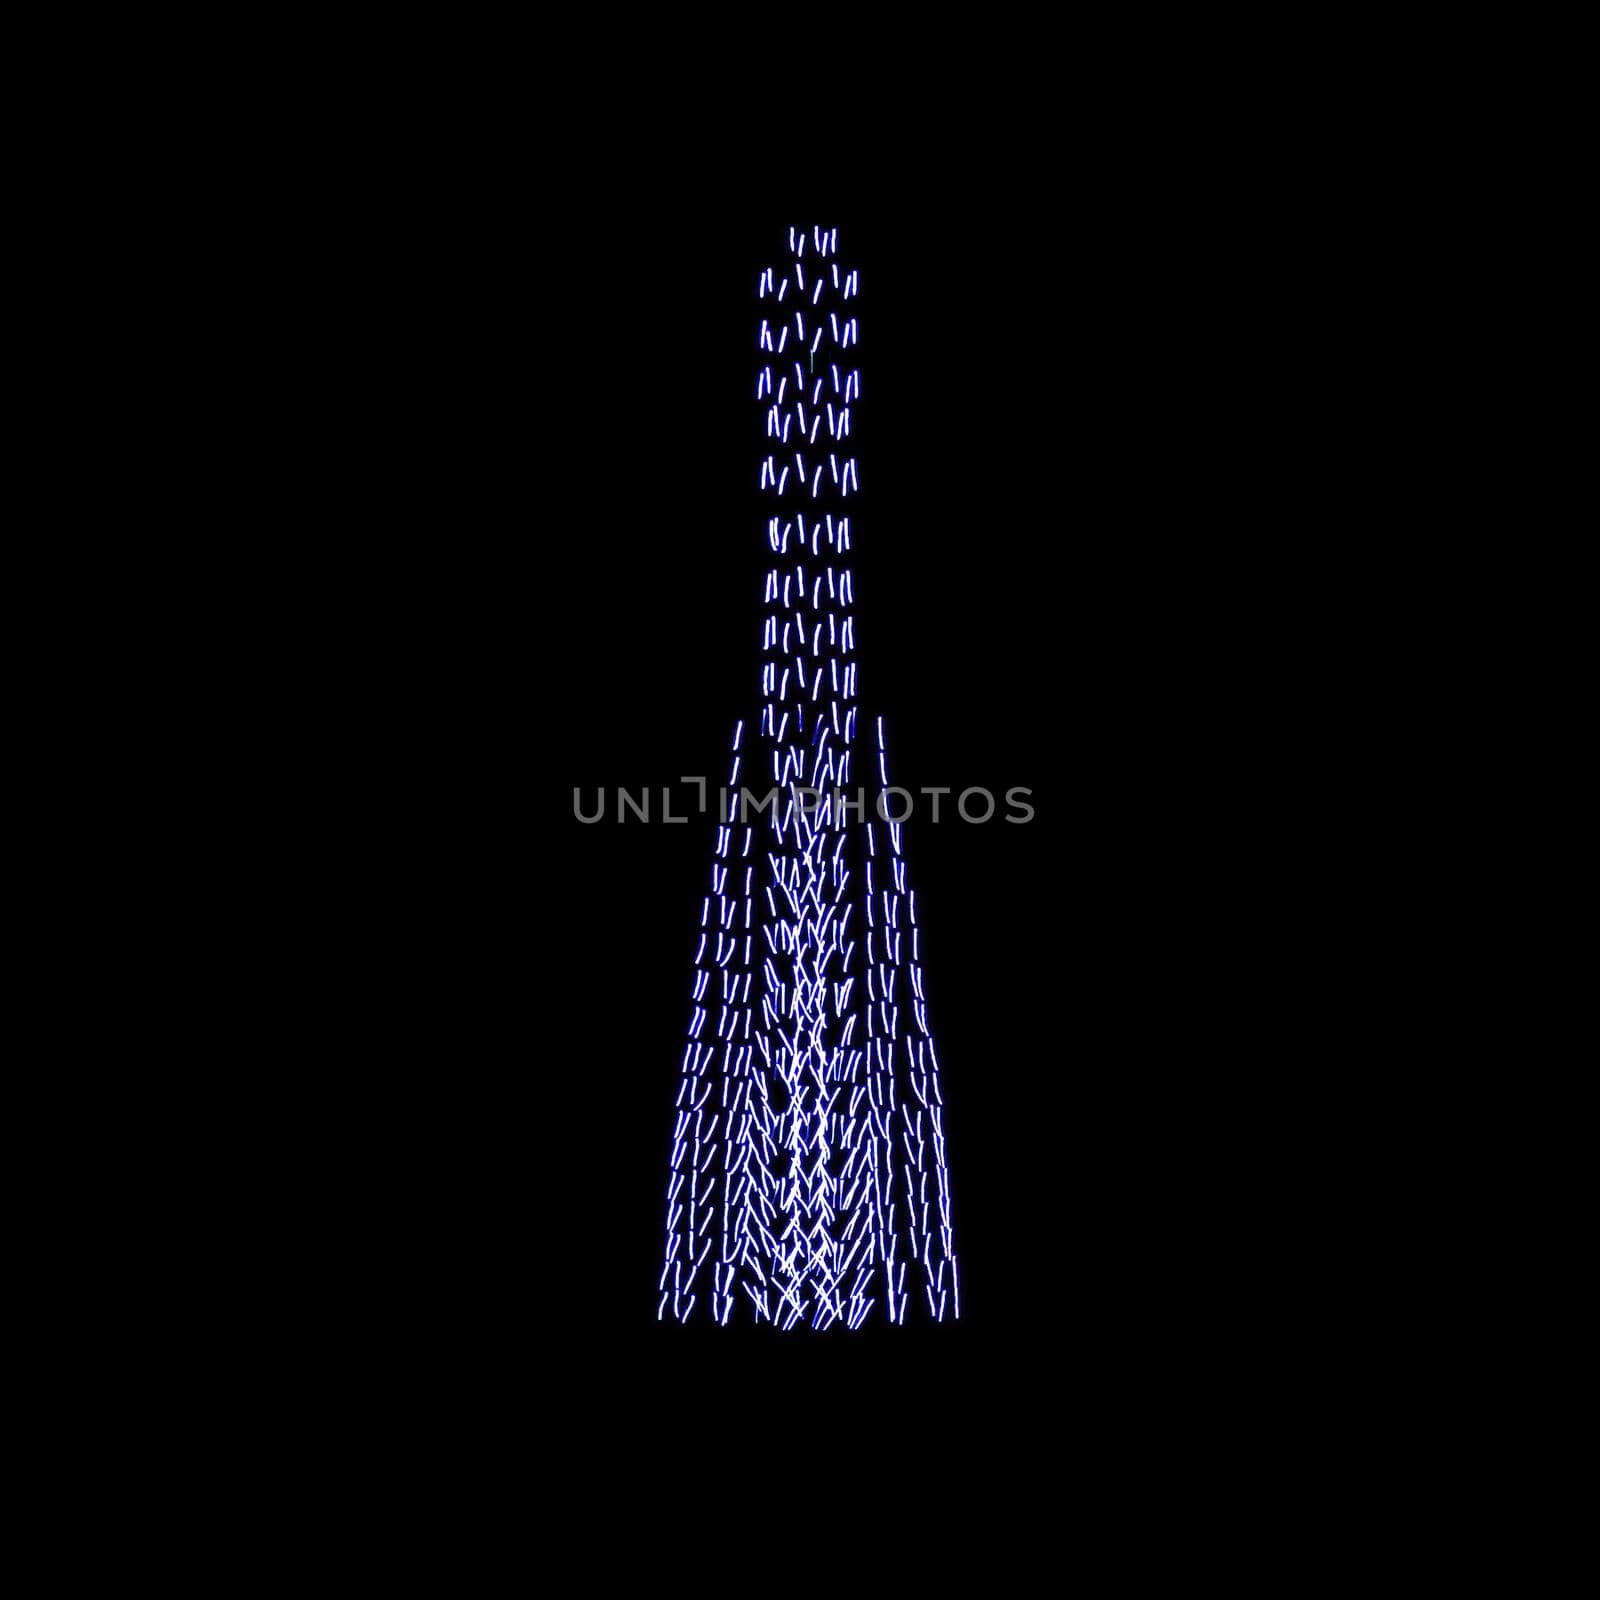 Colorful drone light shows on a night sky background. The figure of a rocket made of glowing drones. by Eugene_Yemelyanov